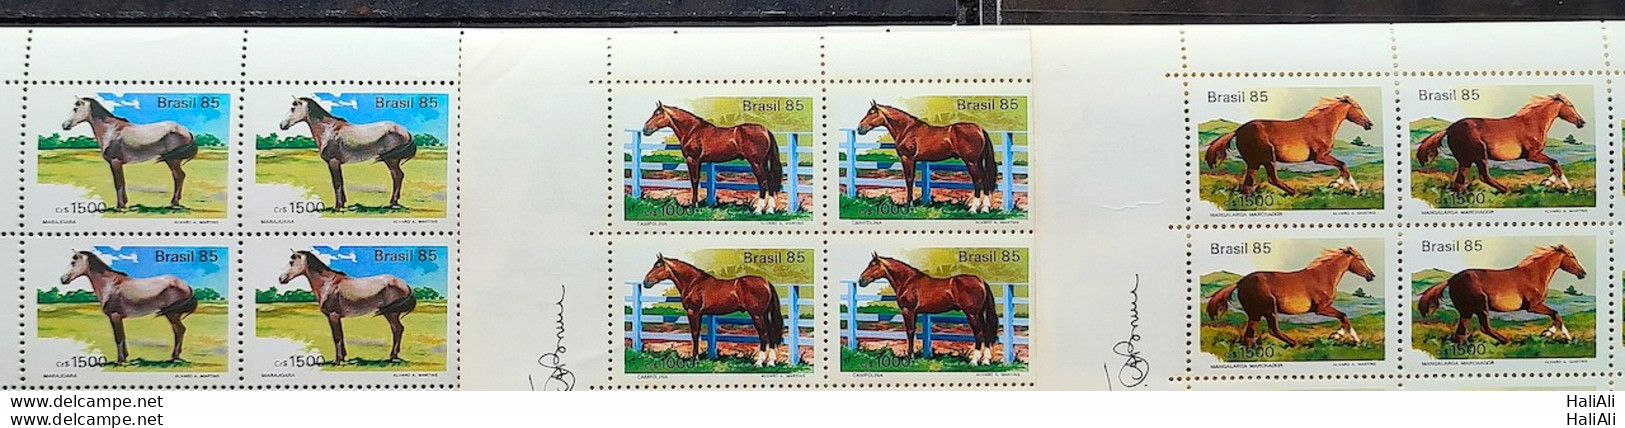 C 1444 Brazil Stamp Brazilian Breed Horses 1985 Block Of 4 Complete Series - Unused Stamps